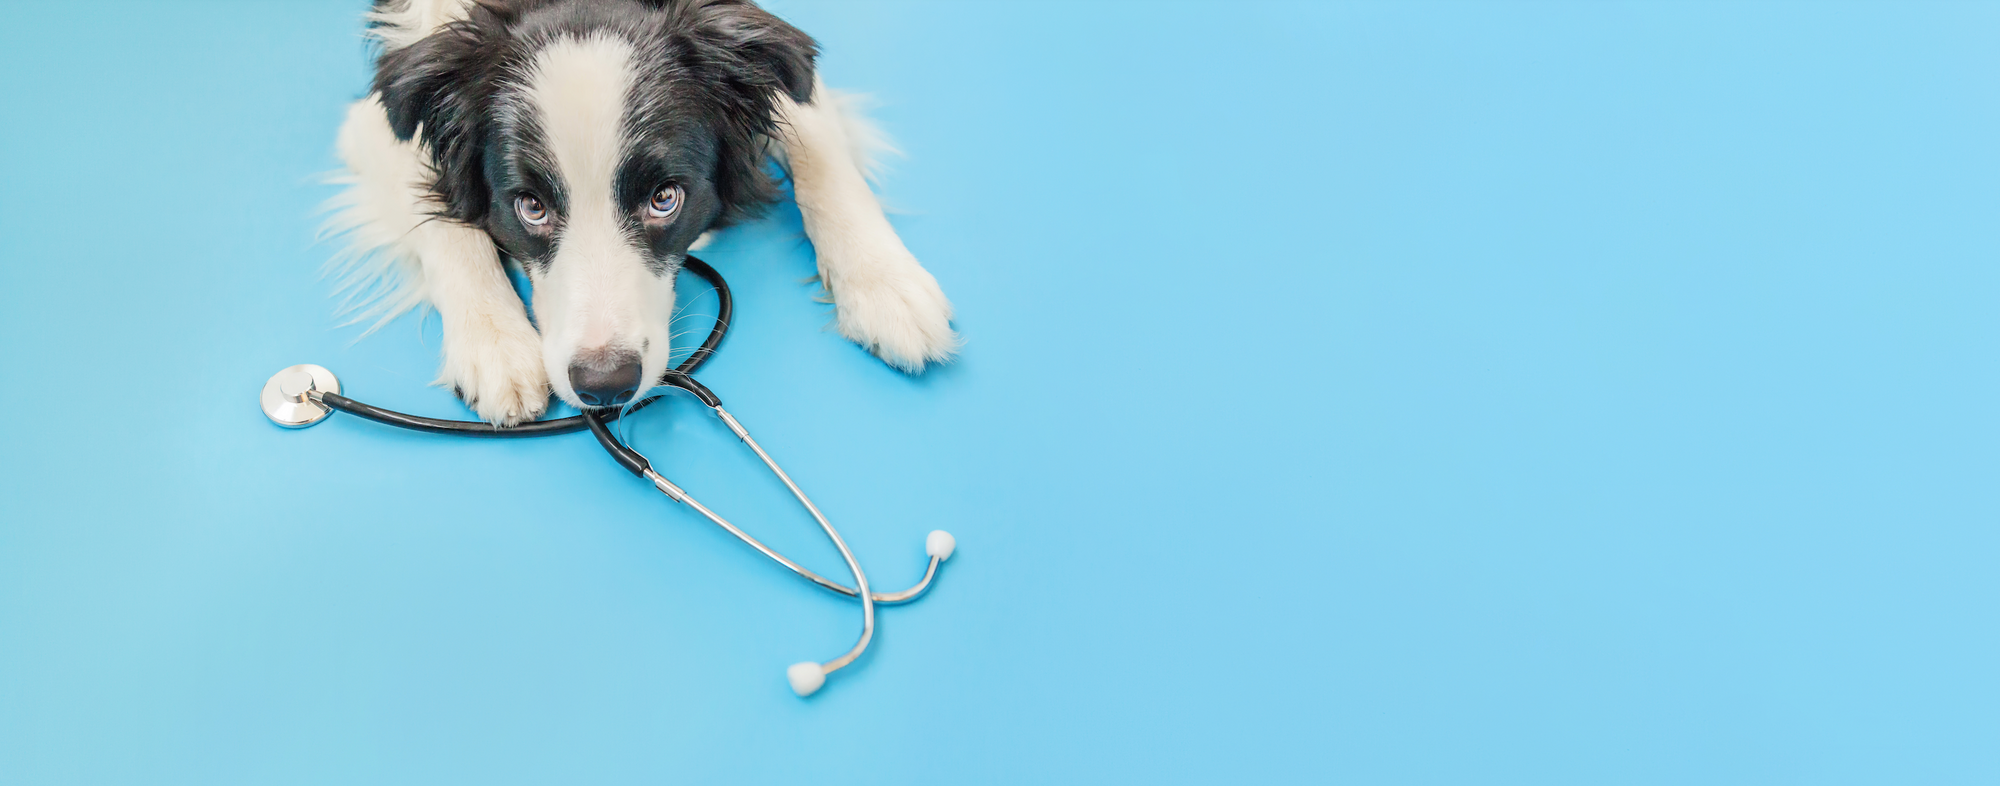 A dog with a stethoscope around its neck lying on the floor, holding a stethoscope in its mouth.